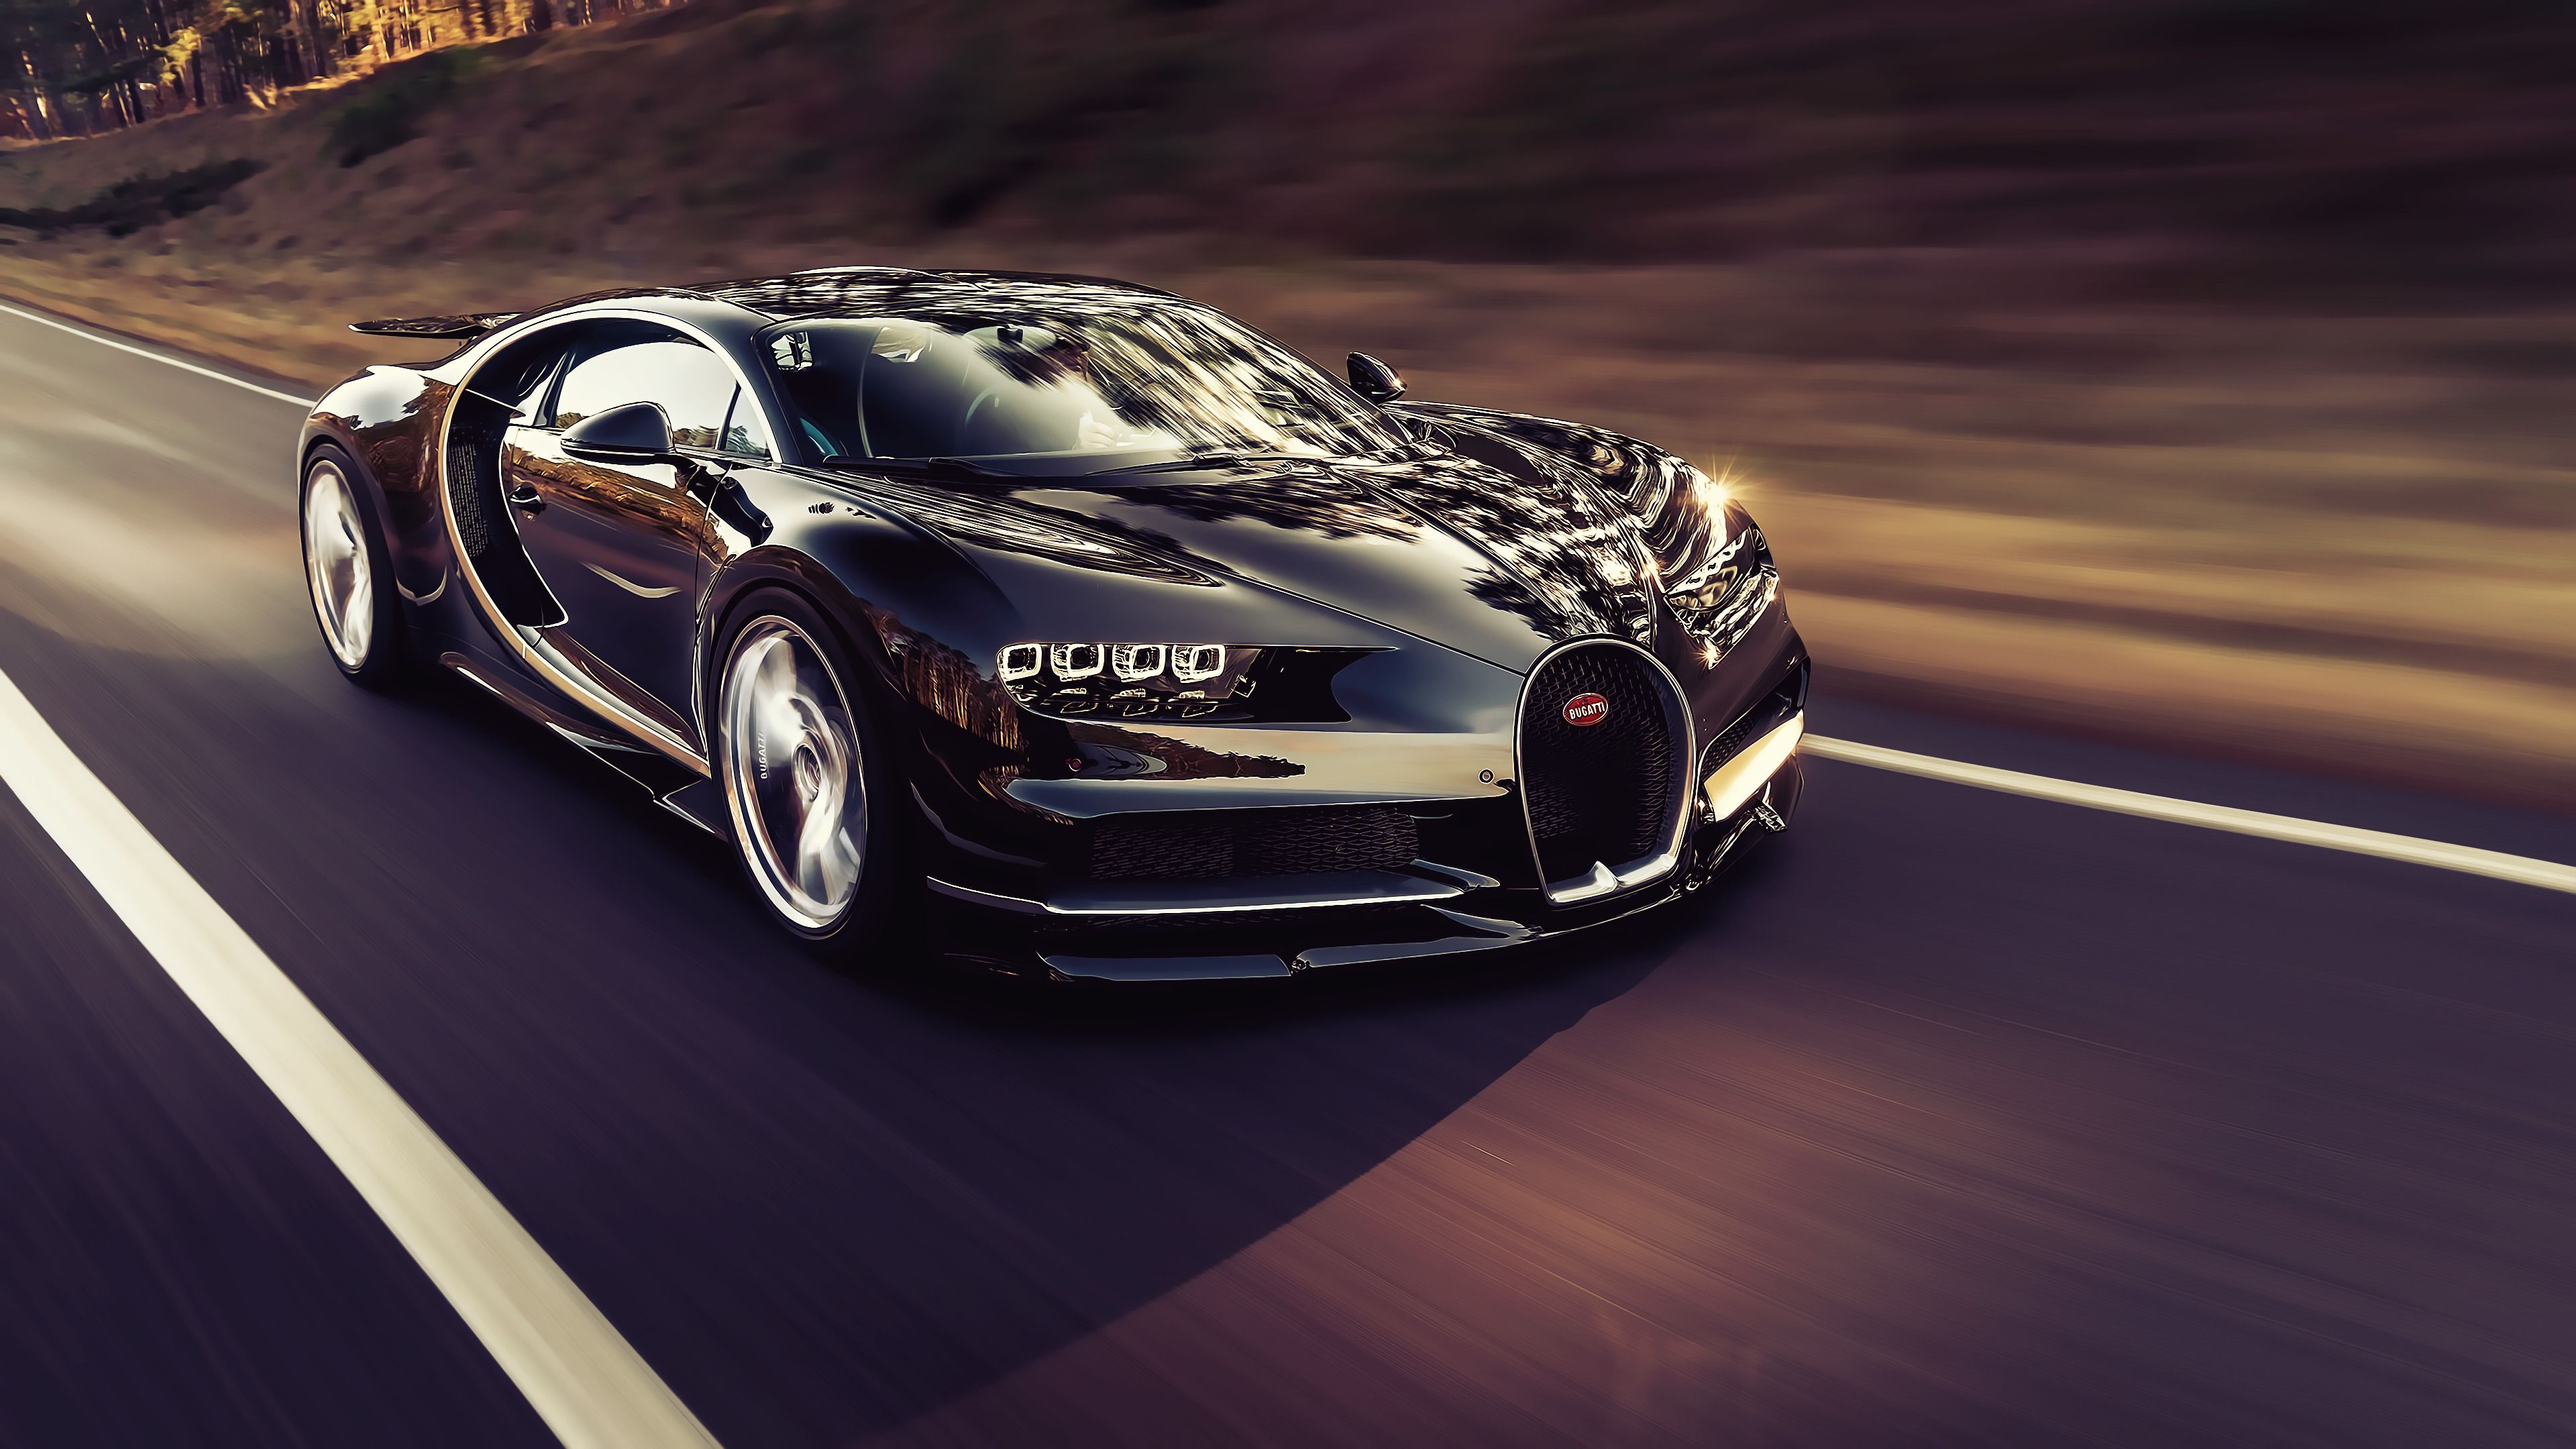 Luxury Cars 4k Wallpapers - Wallpaper Cave